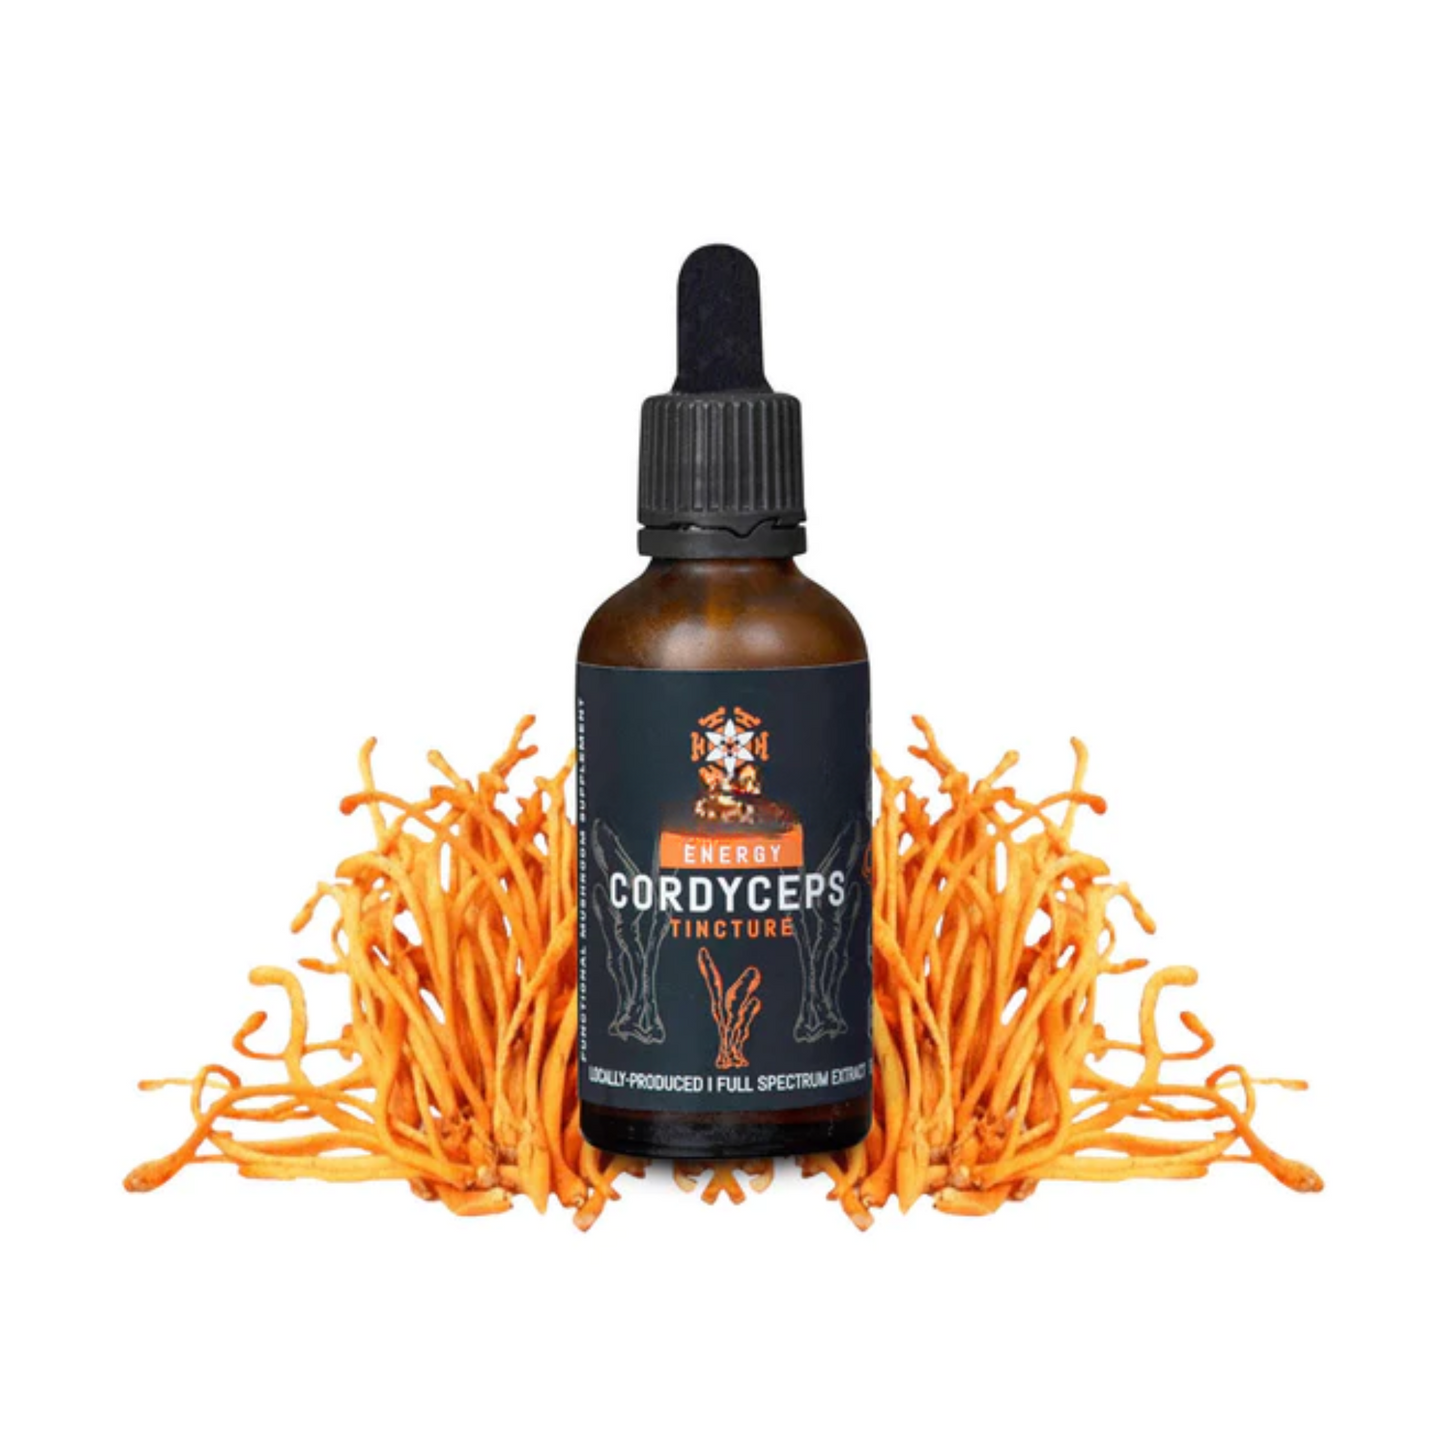 Cordyceps Mushroom Extract Tincture, Boosts Energy & Athletic Performance, 30ml Bottle, 60 Servings, Natural Supplement for Stamina and Endurance, Single Pack